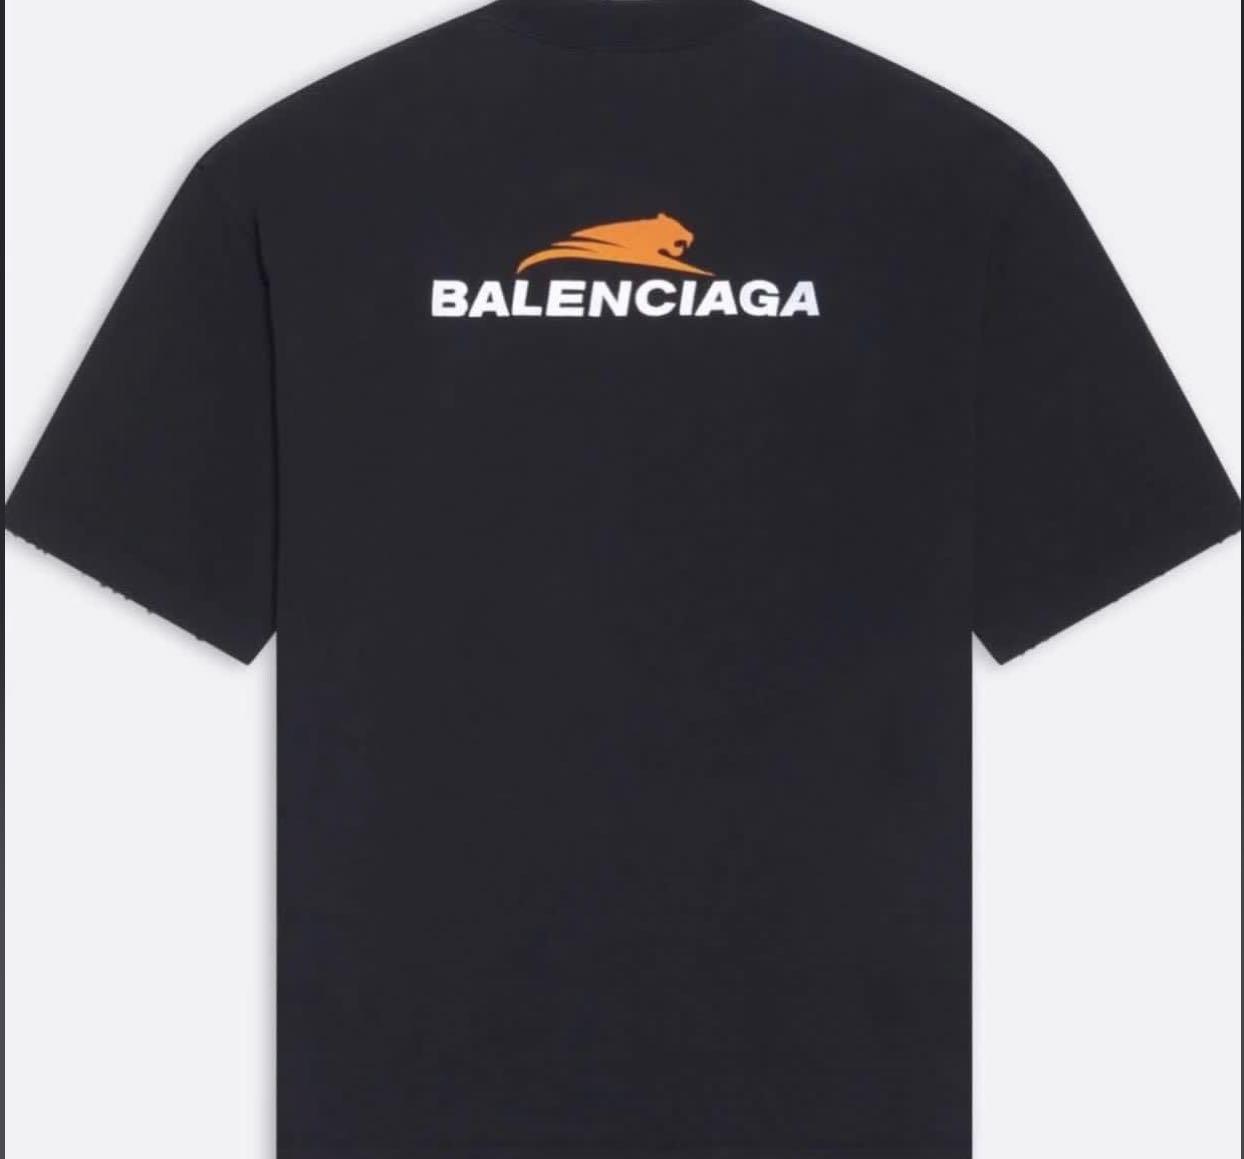 Balenciaga Pays Tribute to the Year of the Tiger